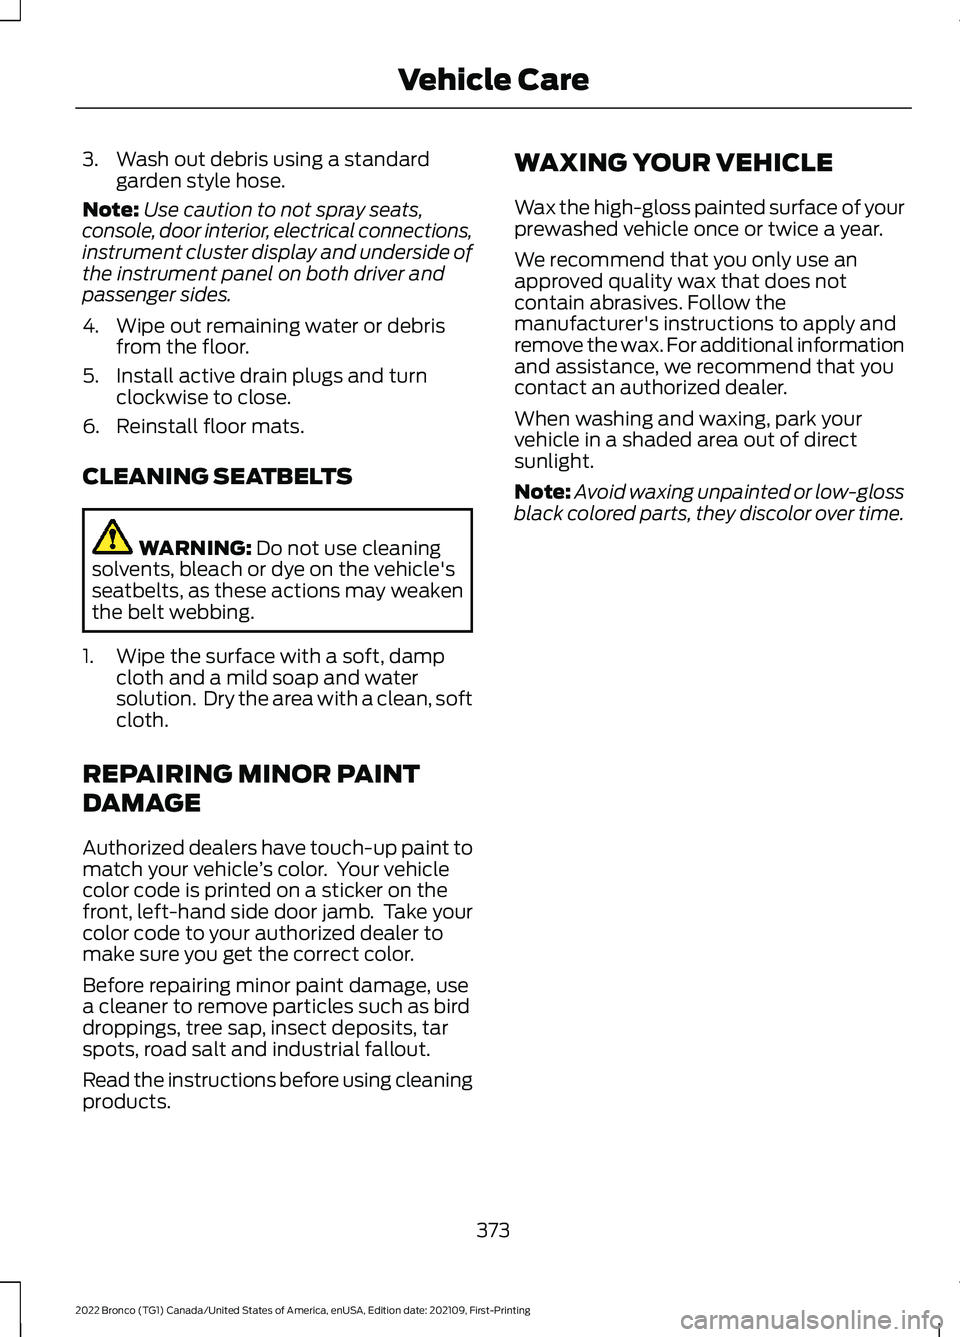 FORD BRONCO 2022 Service Manual 3.Wash out debris using a standardgarden style hose.
Note:Use caution to not spray seats,console, door interior, electrical connections,instrument cluster display and underside ofthe instrument panel 